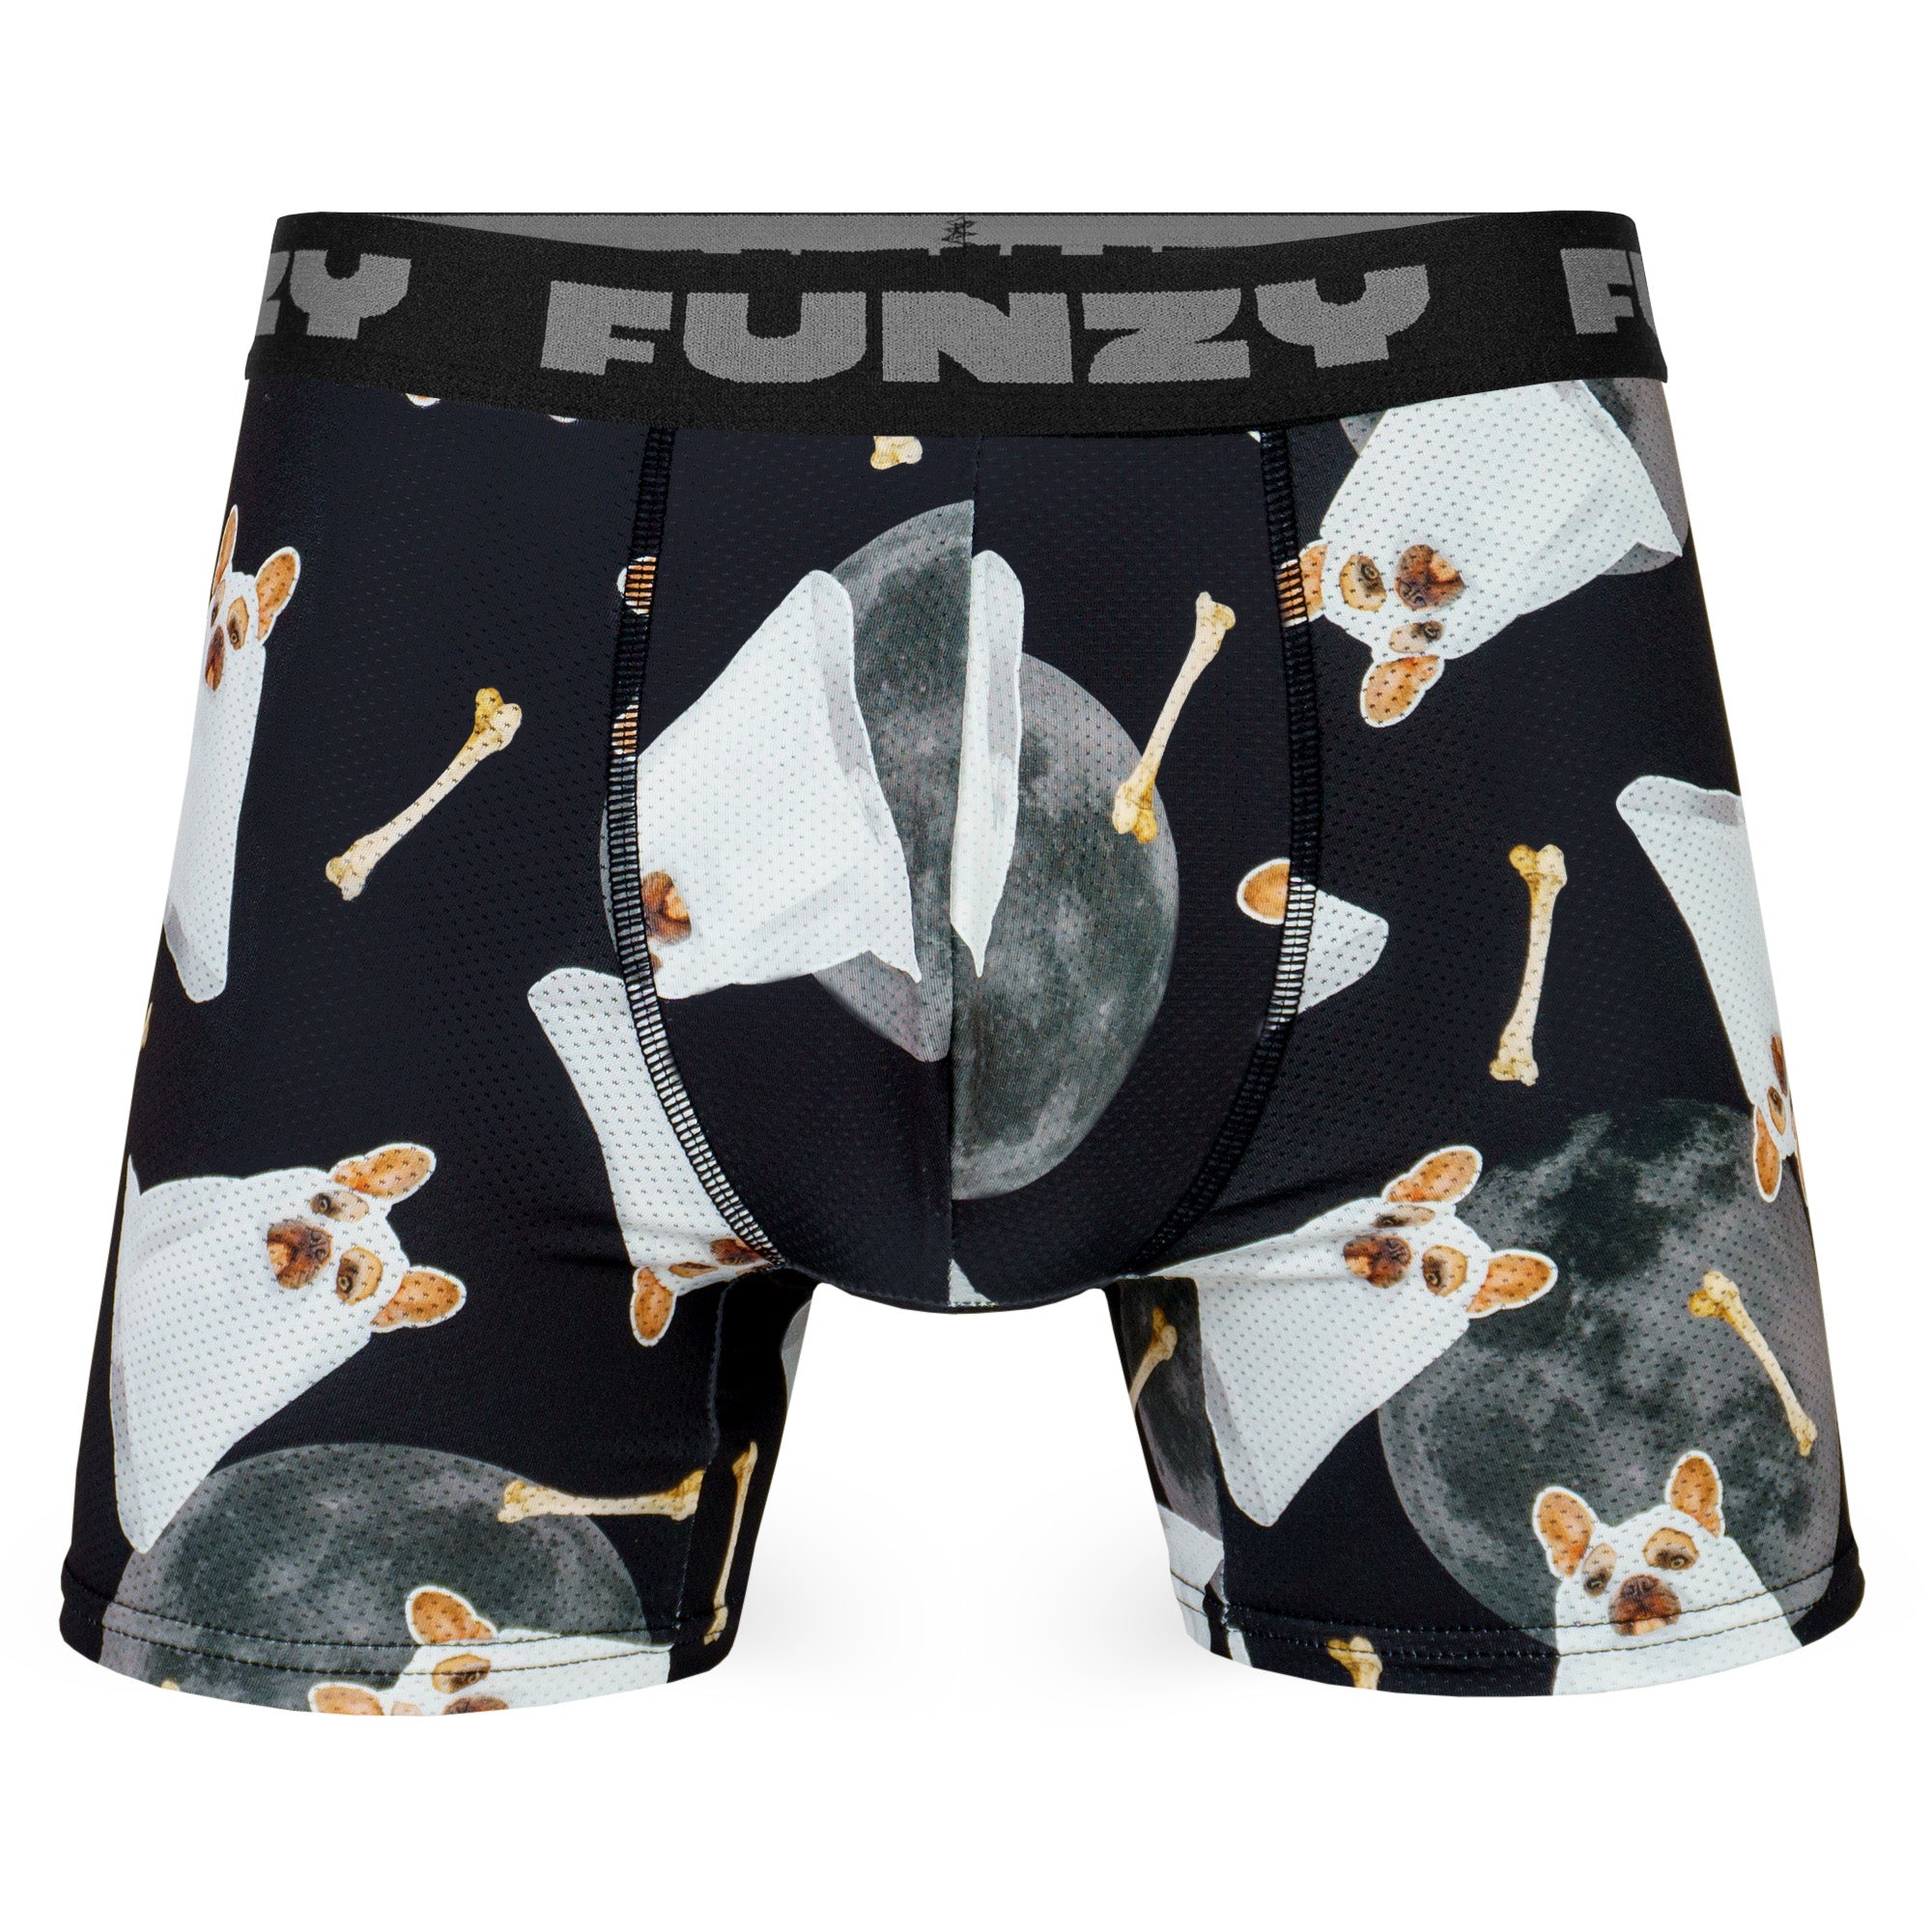 Mystery pack of 6 Funzy boxers